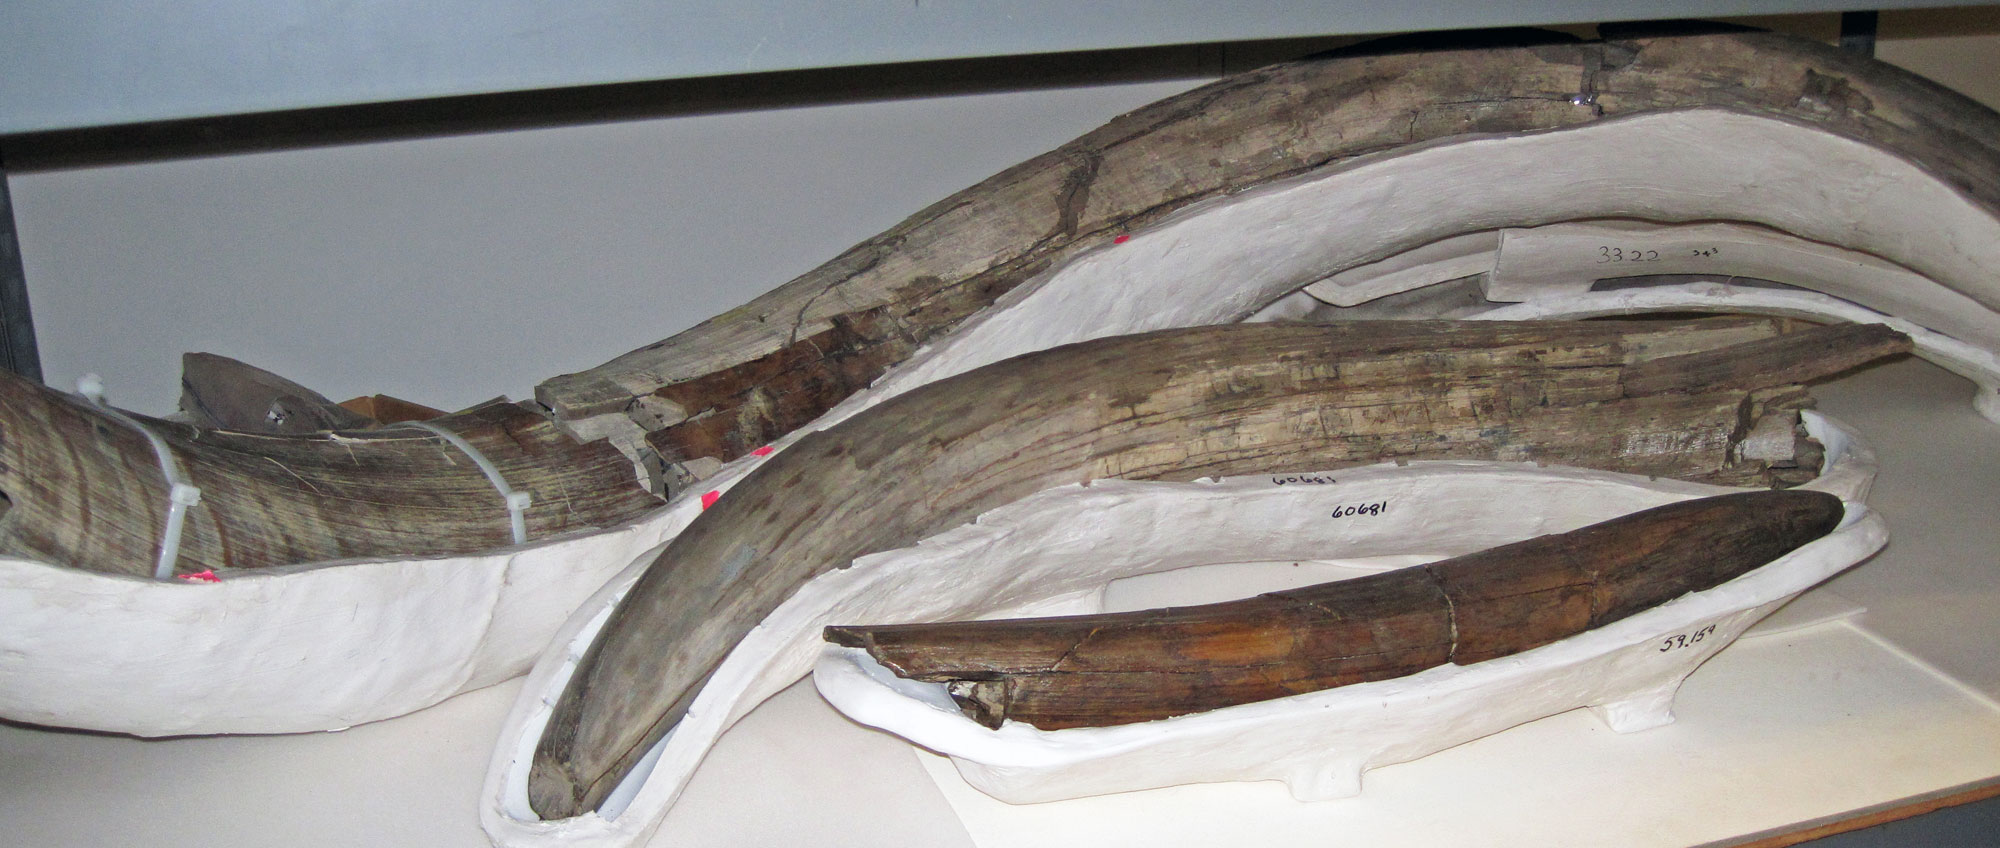 Photograph of mastodon tusks from Snowmass, Colorado. In this image, three tusks are shown, arranged from longest at the top of the image to shortest at the bottom.